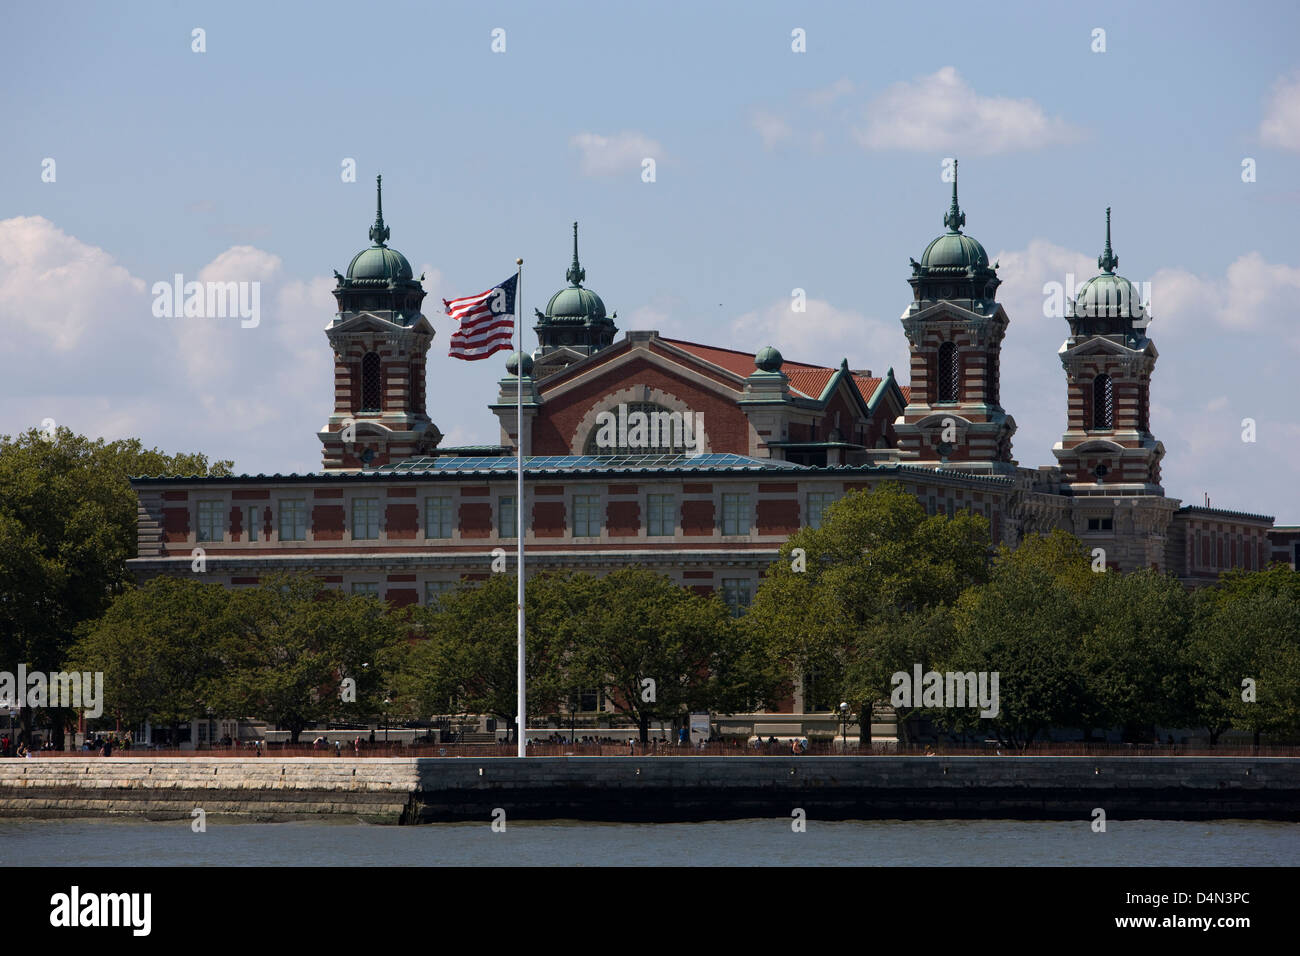 Ellis Island immigrant inspection station, Upper New York Bay, gateway for millions of immigrants to the USA Stock Photo